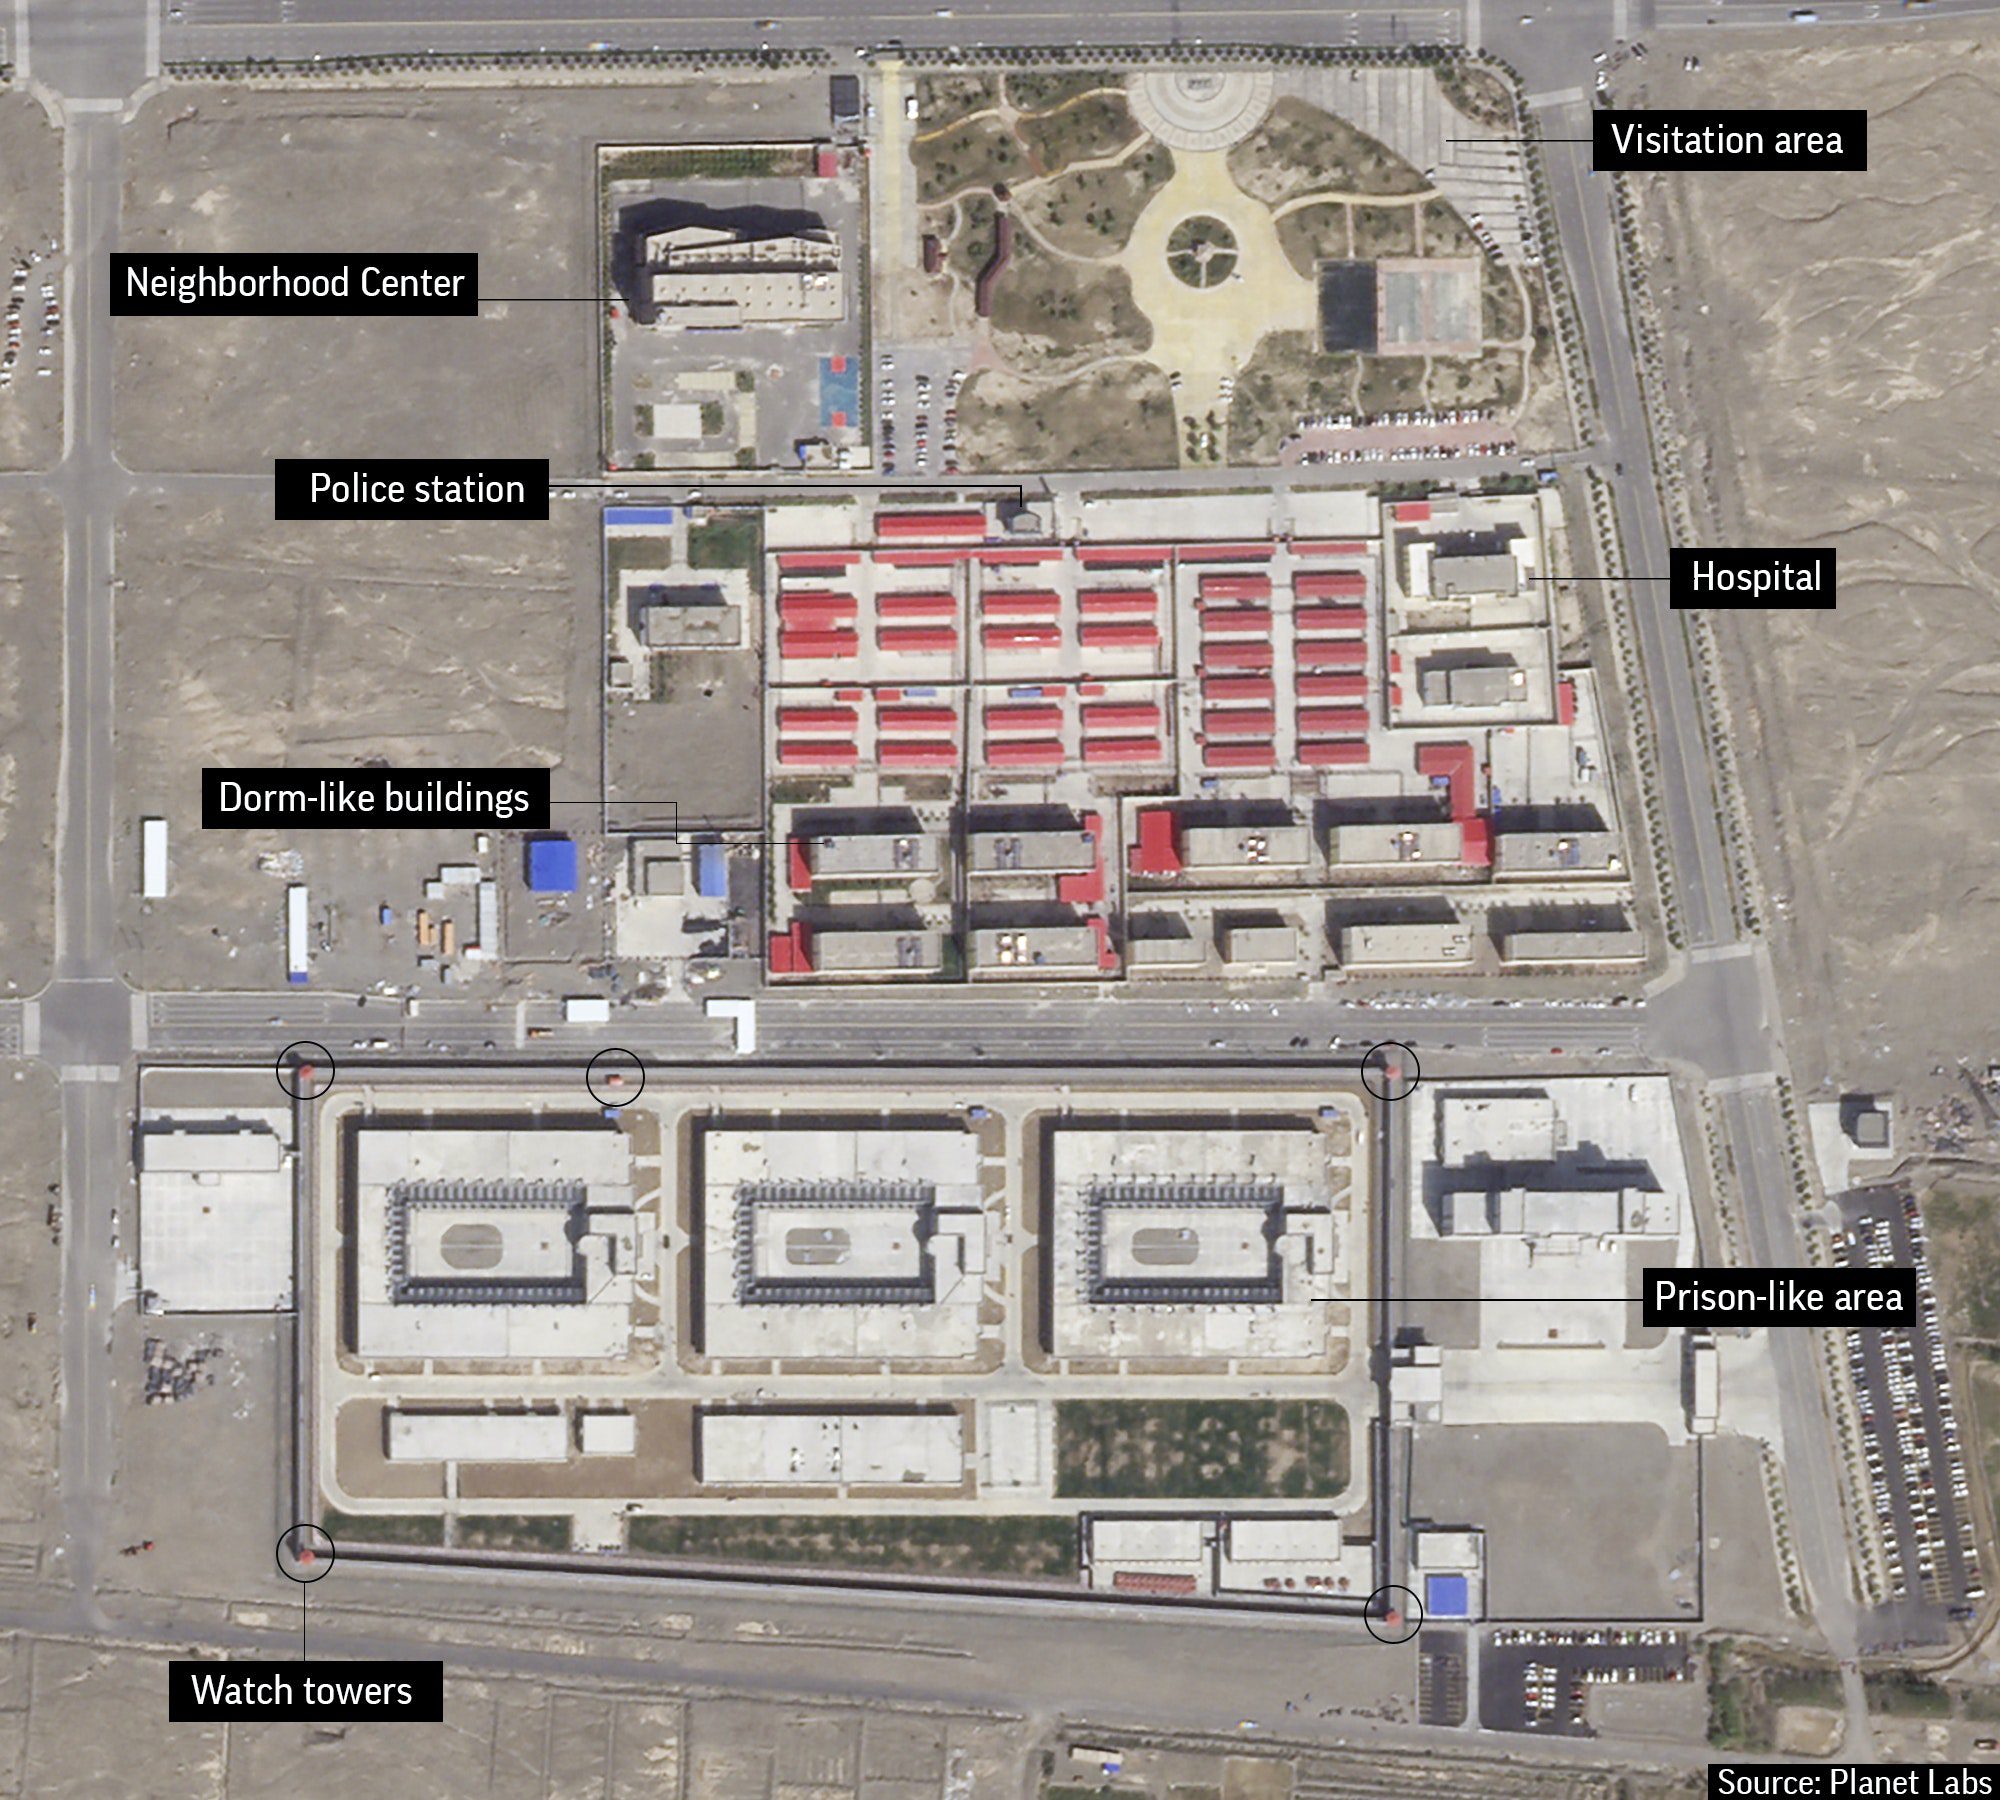 A view from above shows buildings in a grid, with identifying labels such as police station, hospital and visitation center.